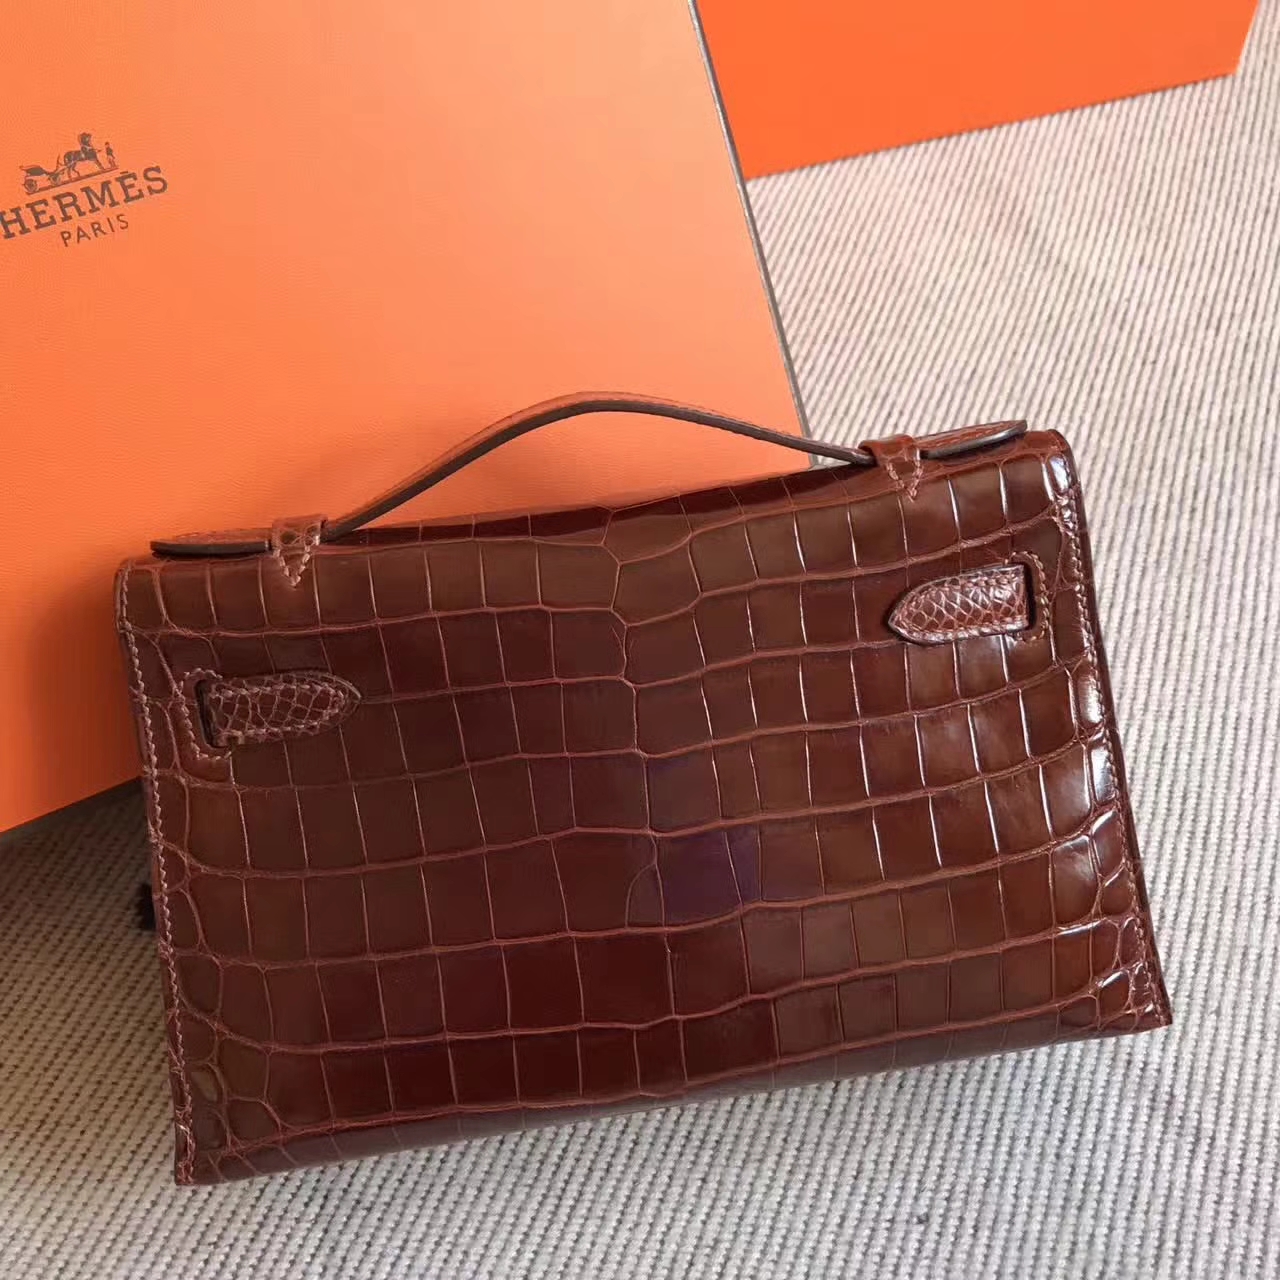 Discount Hermes Brown Shiny Crocodile Leather Minikelly Pochette 22CM